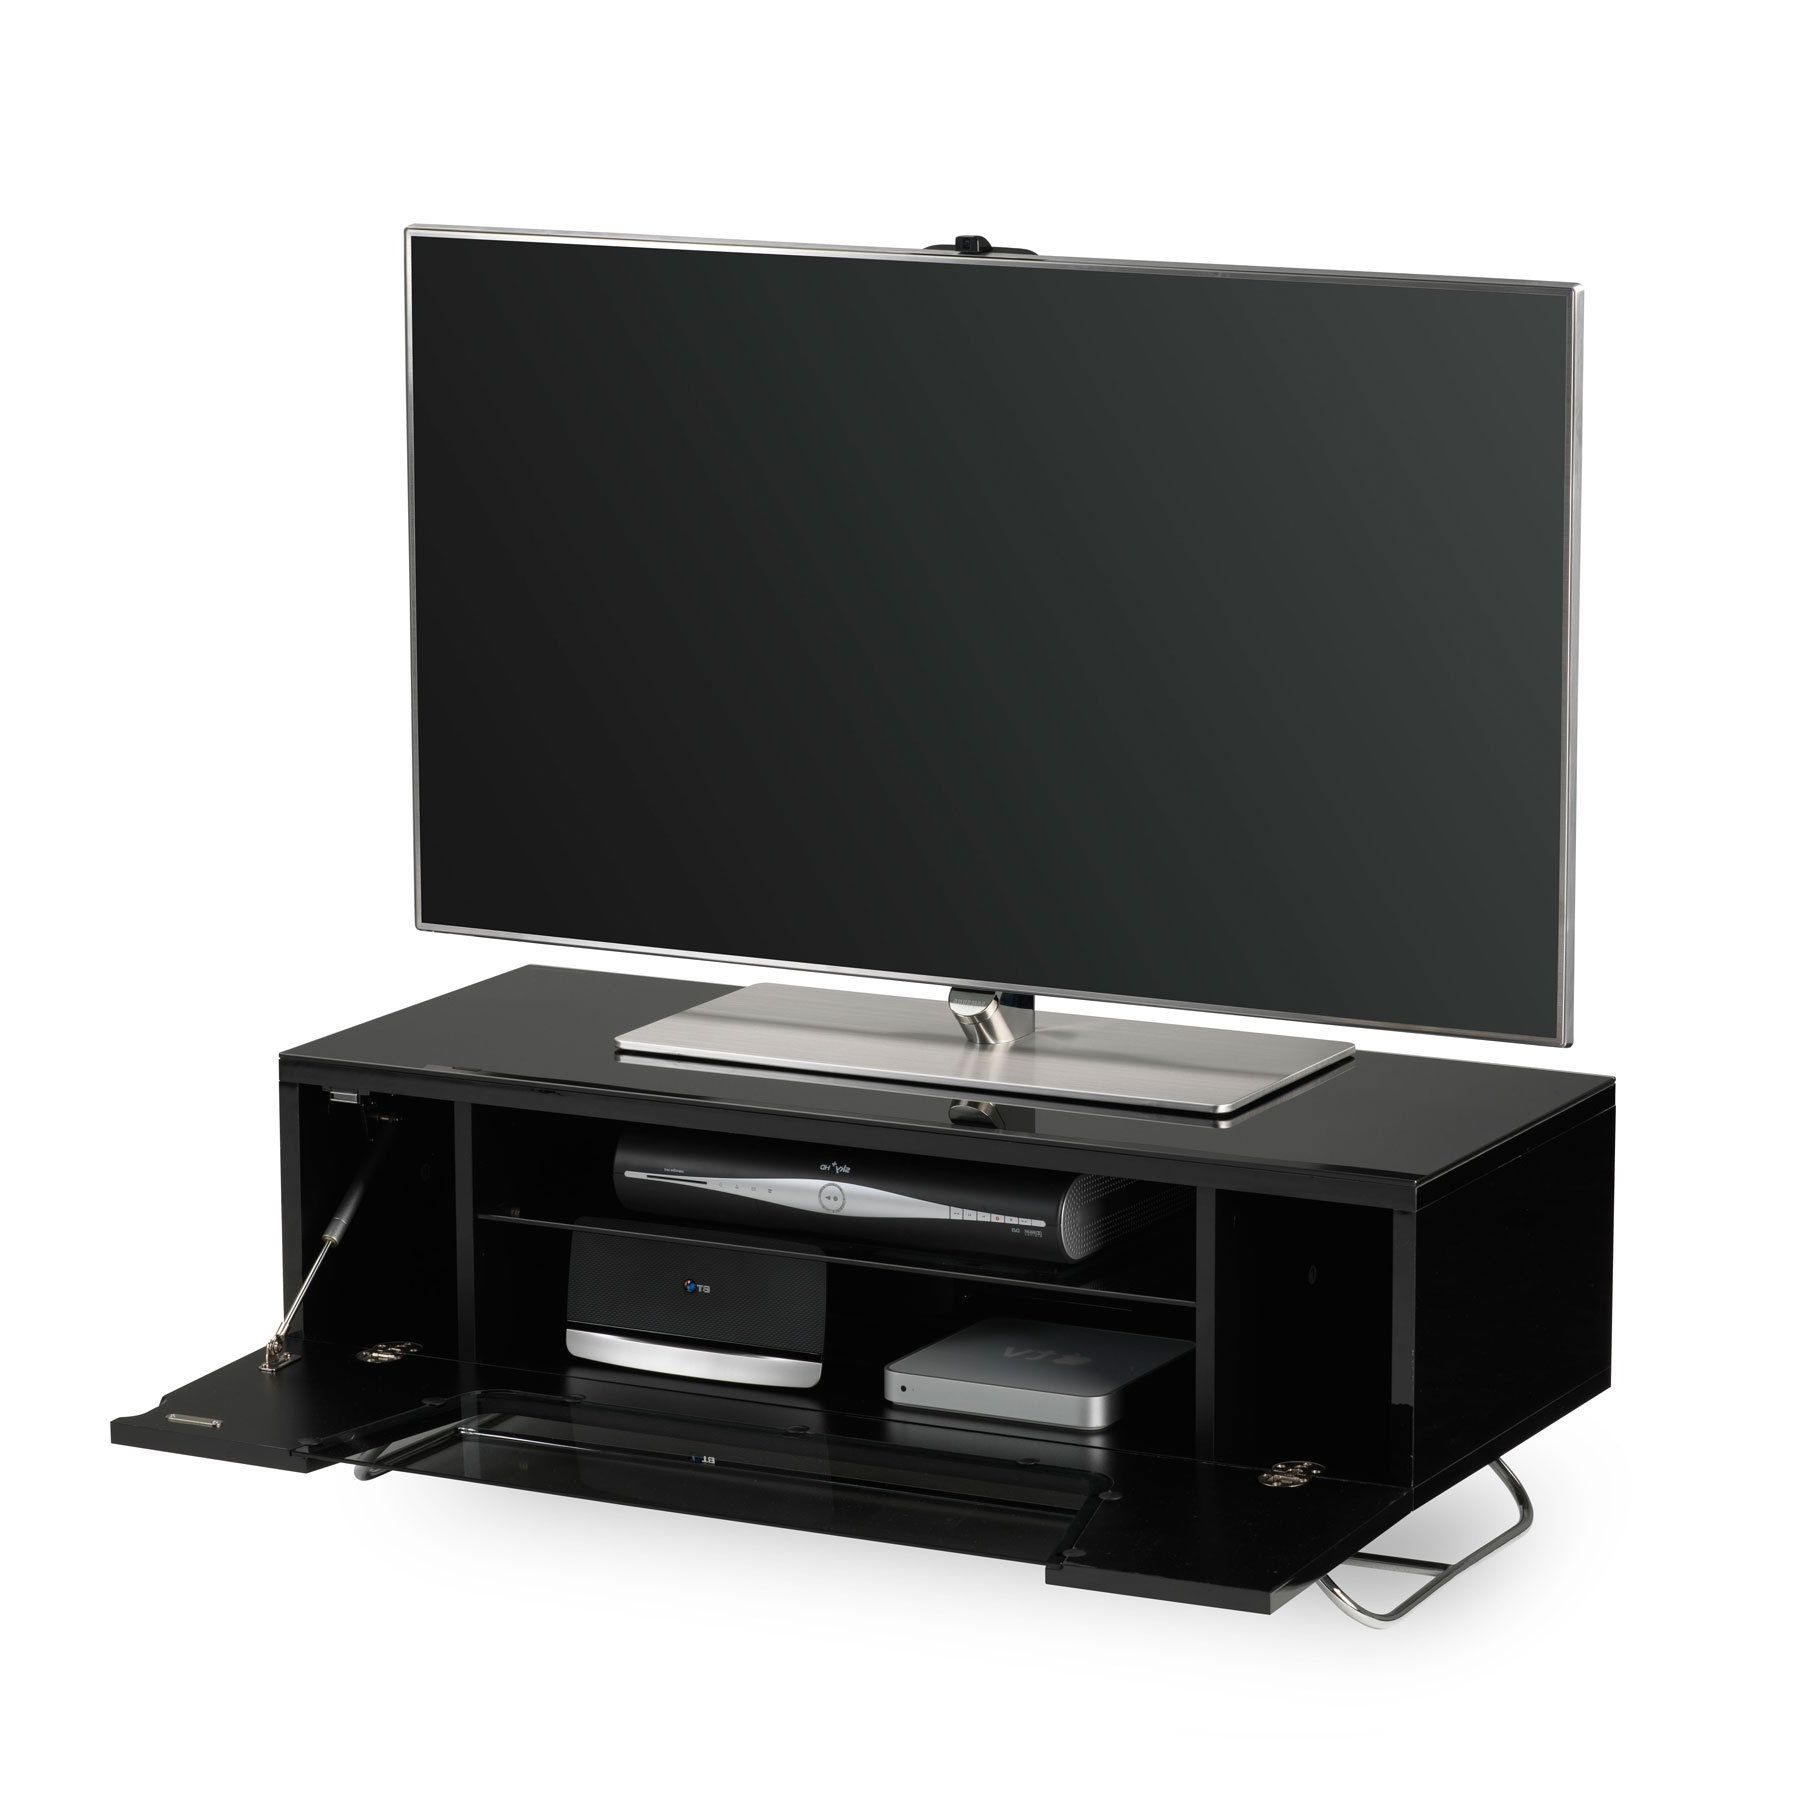 Alphason Chromium 2 100cm Black Tv Stand For Up To 50" Tvs In Mclelland Tv Stands For Tvs Up To 50" (View 14 of 20)